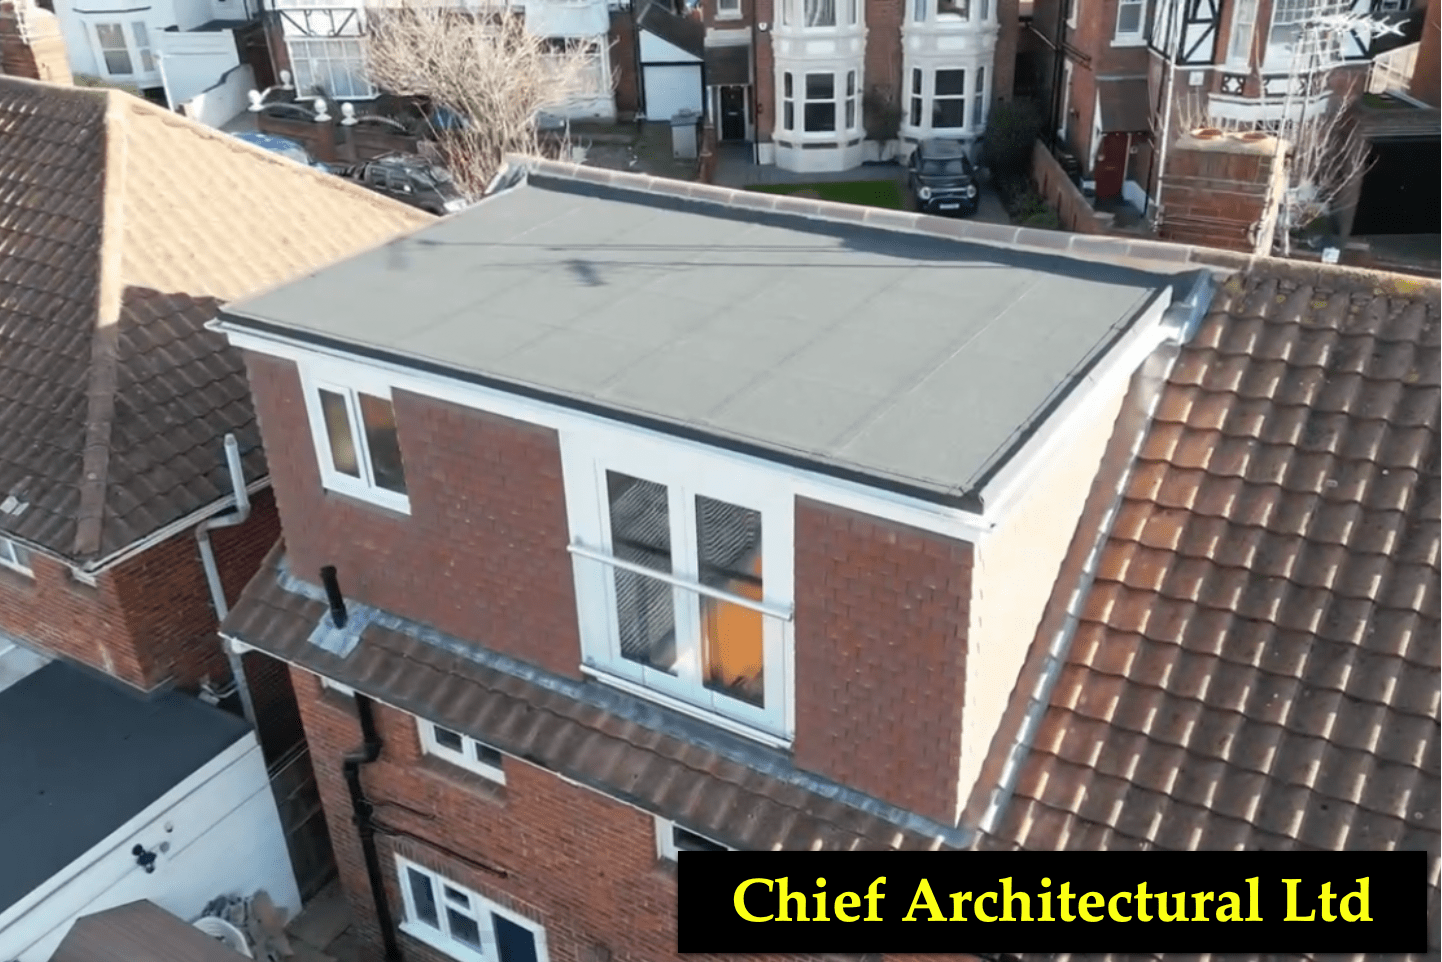 Chief Architectural Ltd project of loft conversion with balcony in Portsmouth.